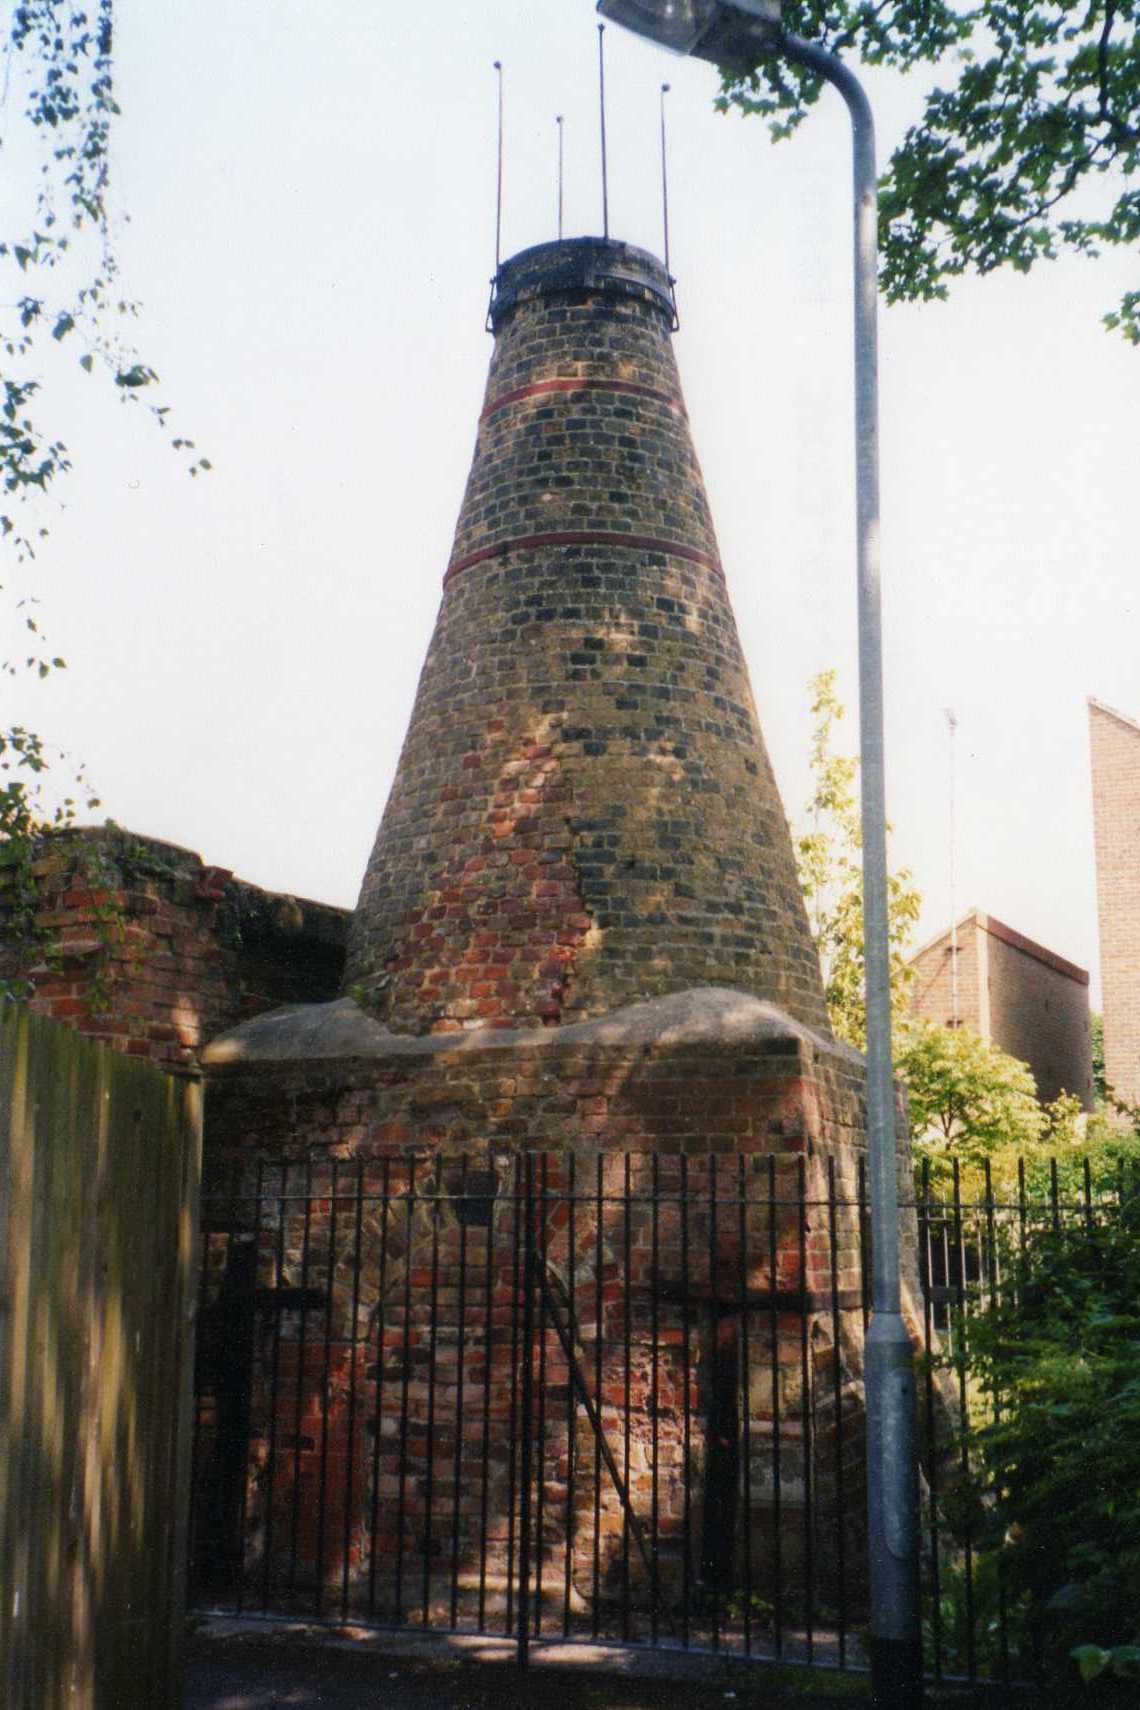 The surviving kiln from the Pulham & Son manufactory